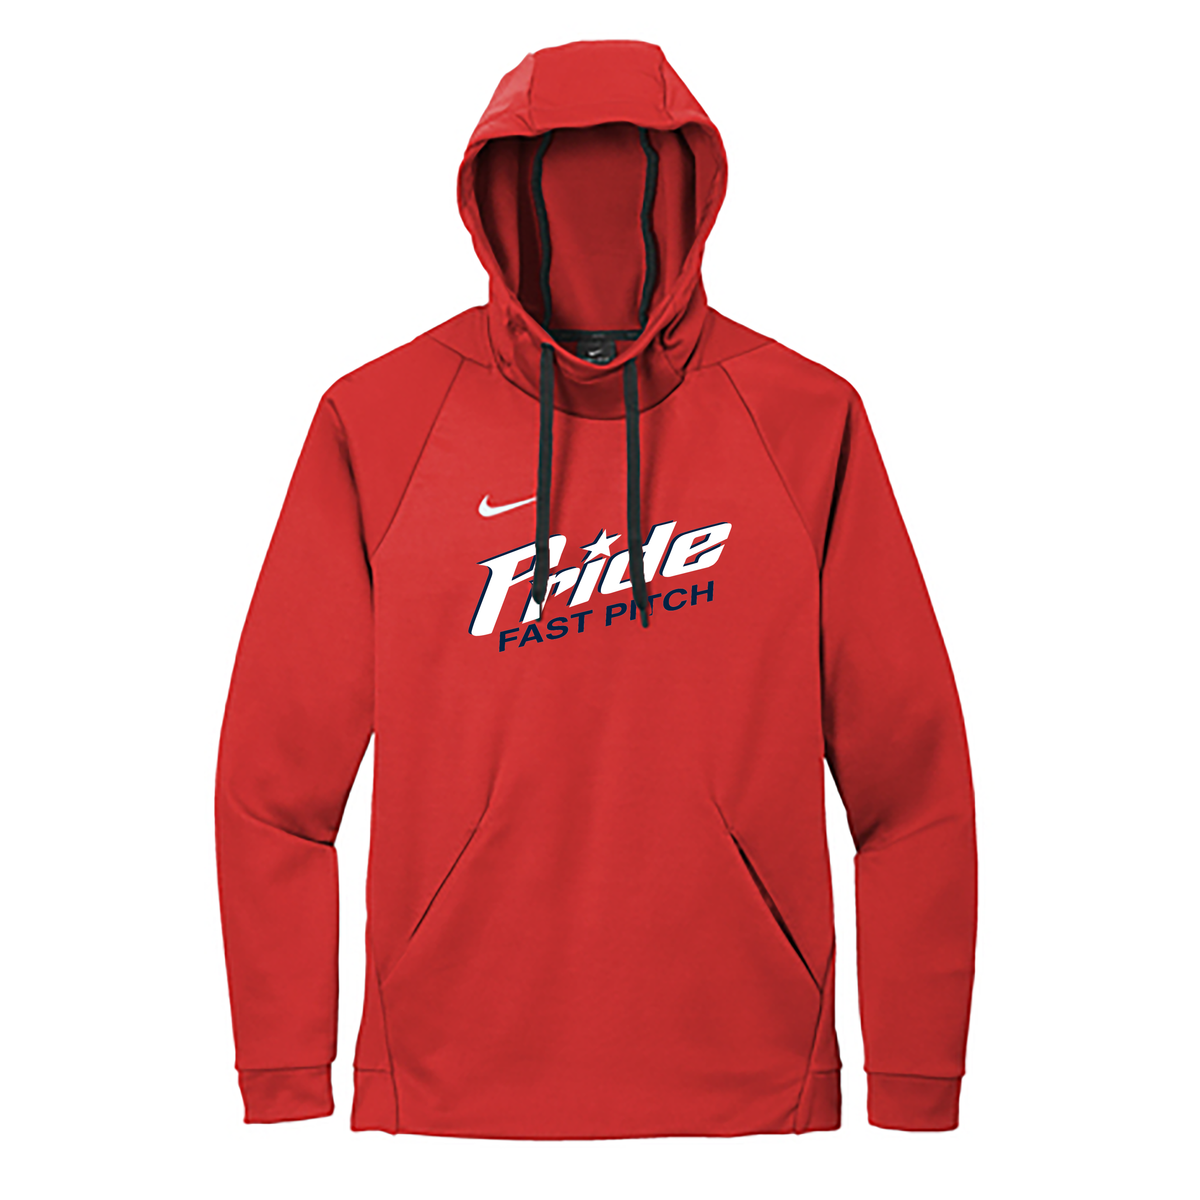 Long Island Pride Fastpitch Nike Therma-FIT Embroidered Hoodie